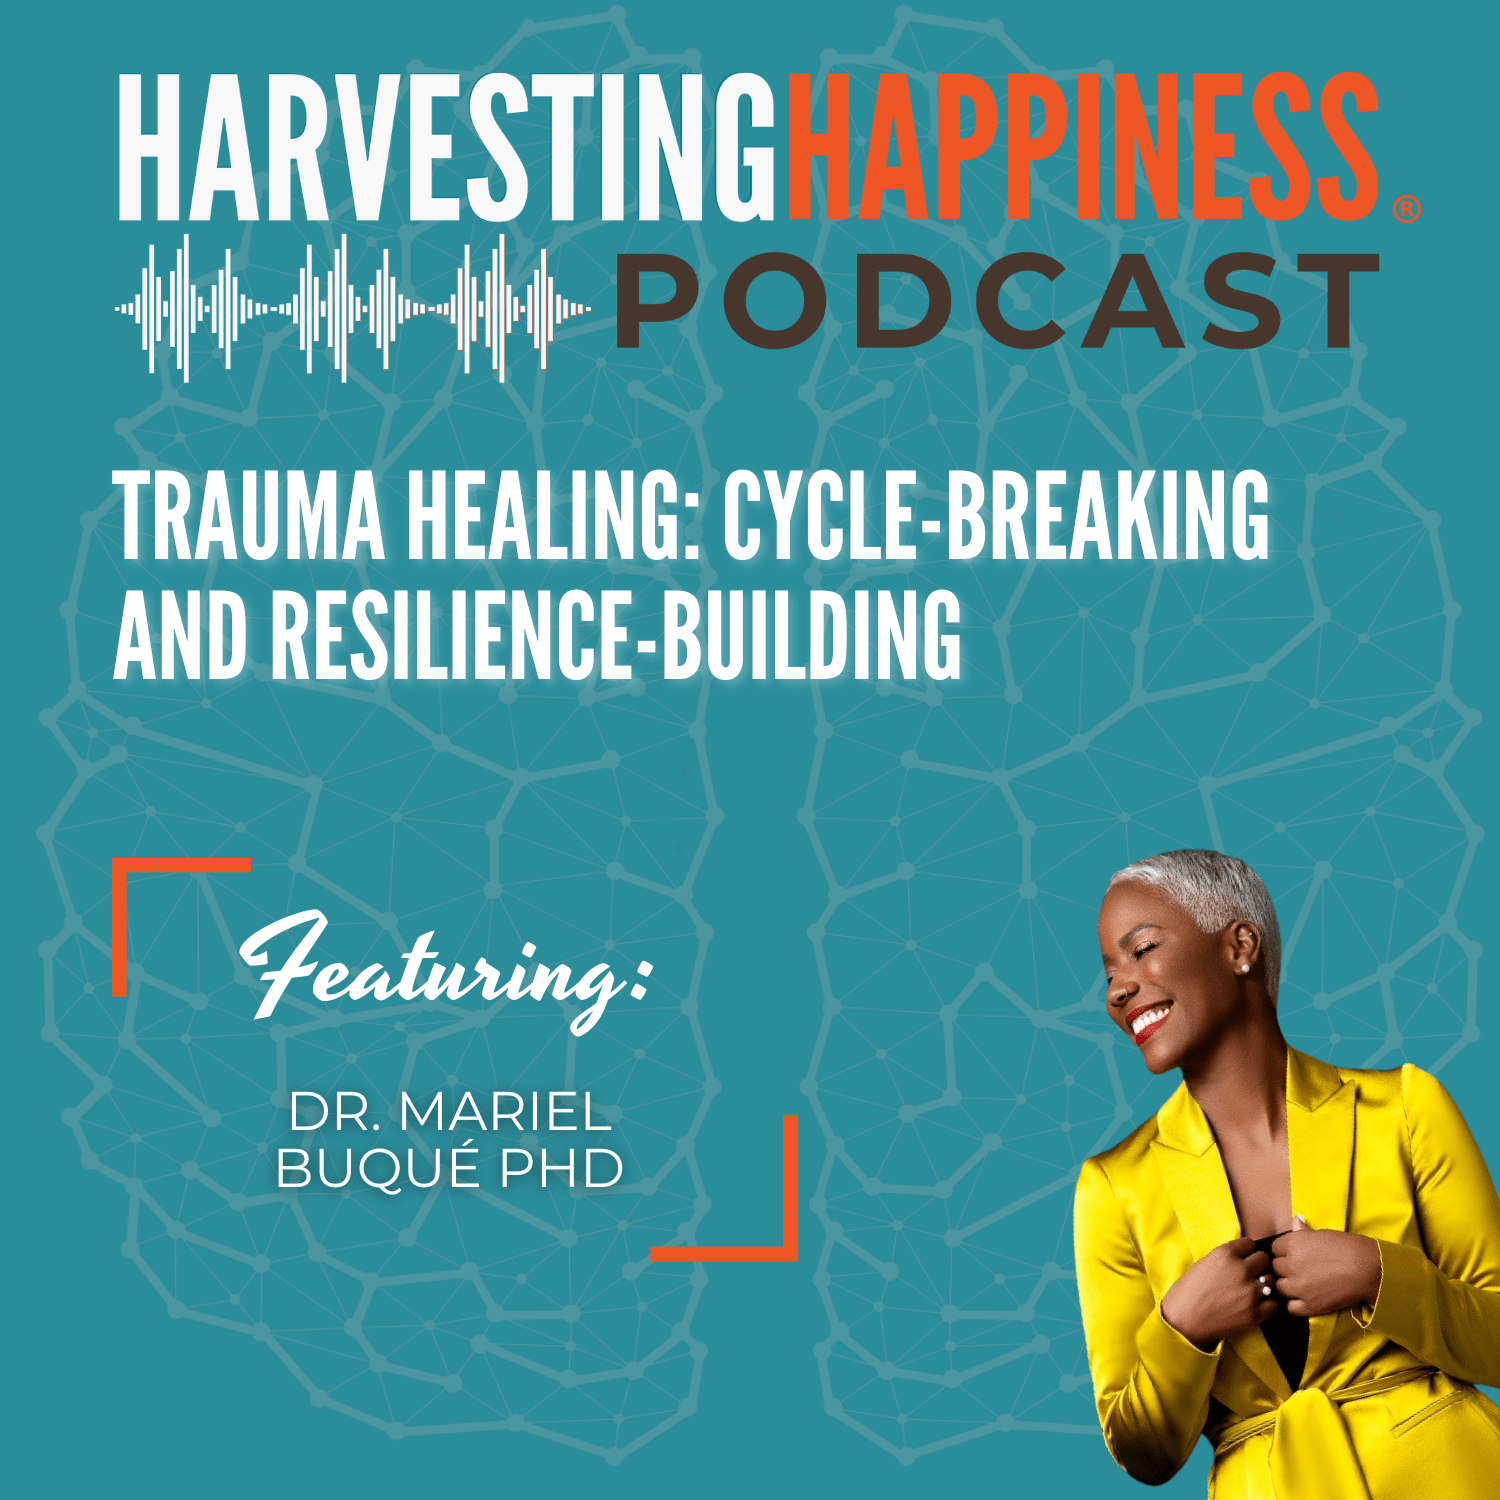 Trauma Healing: Cycle-Breaking and Resilience-Building with Dr. Mariel Buqué PhD